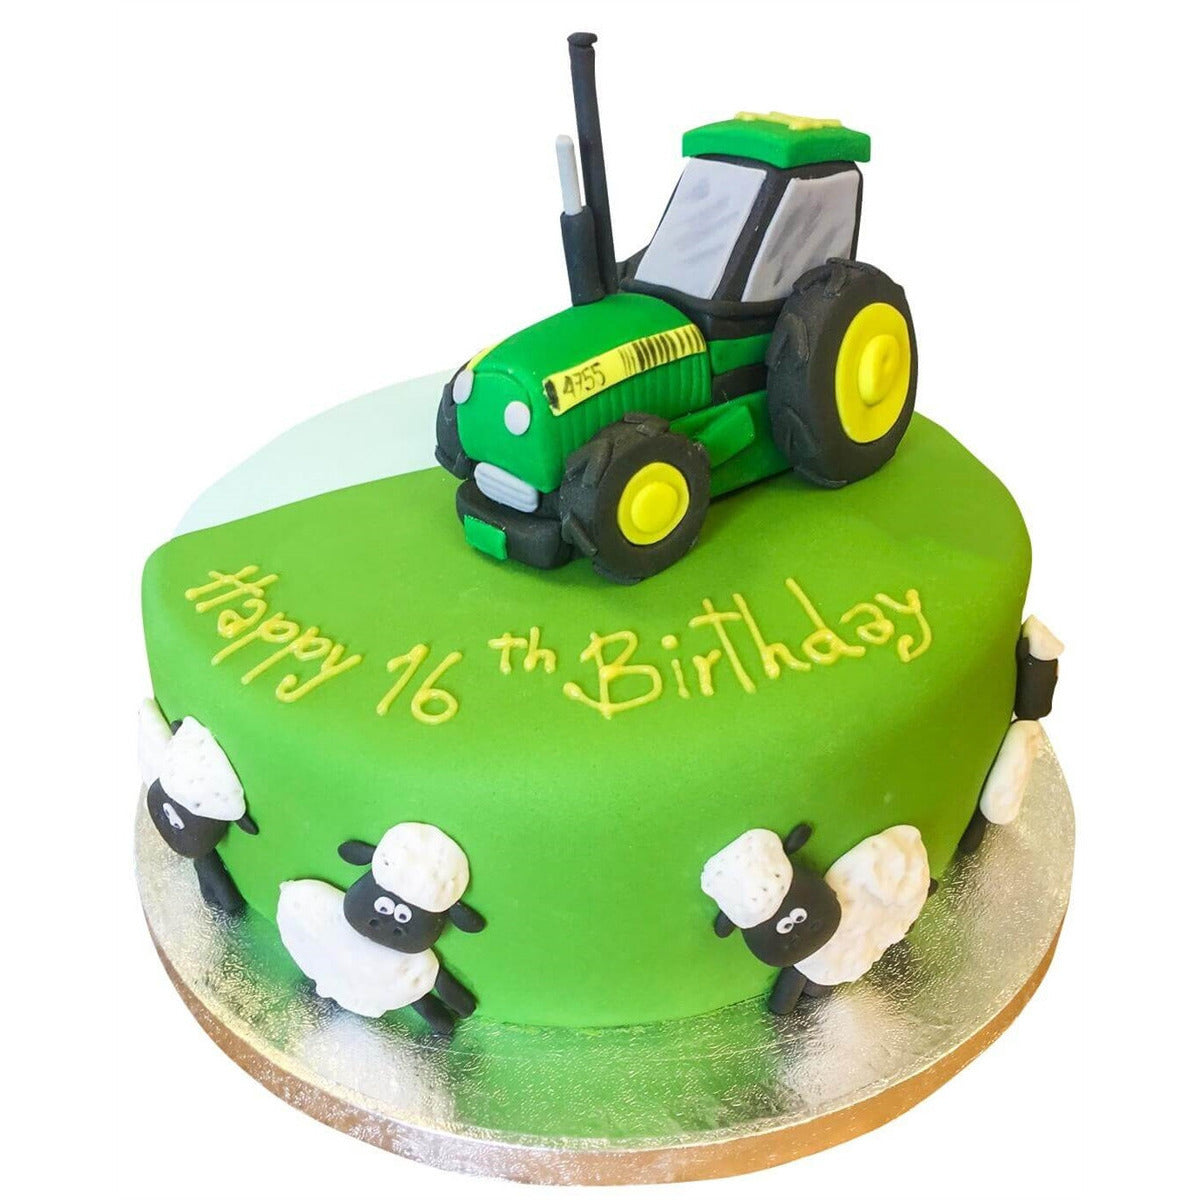 Birthday Tractor Cake On Table No Stock Photo 1515593588 | Shutterstock